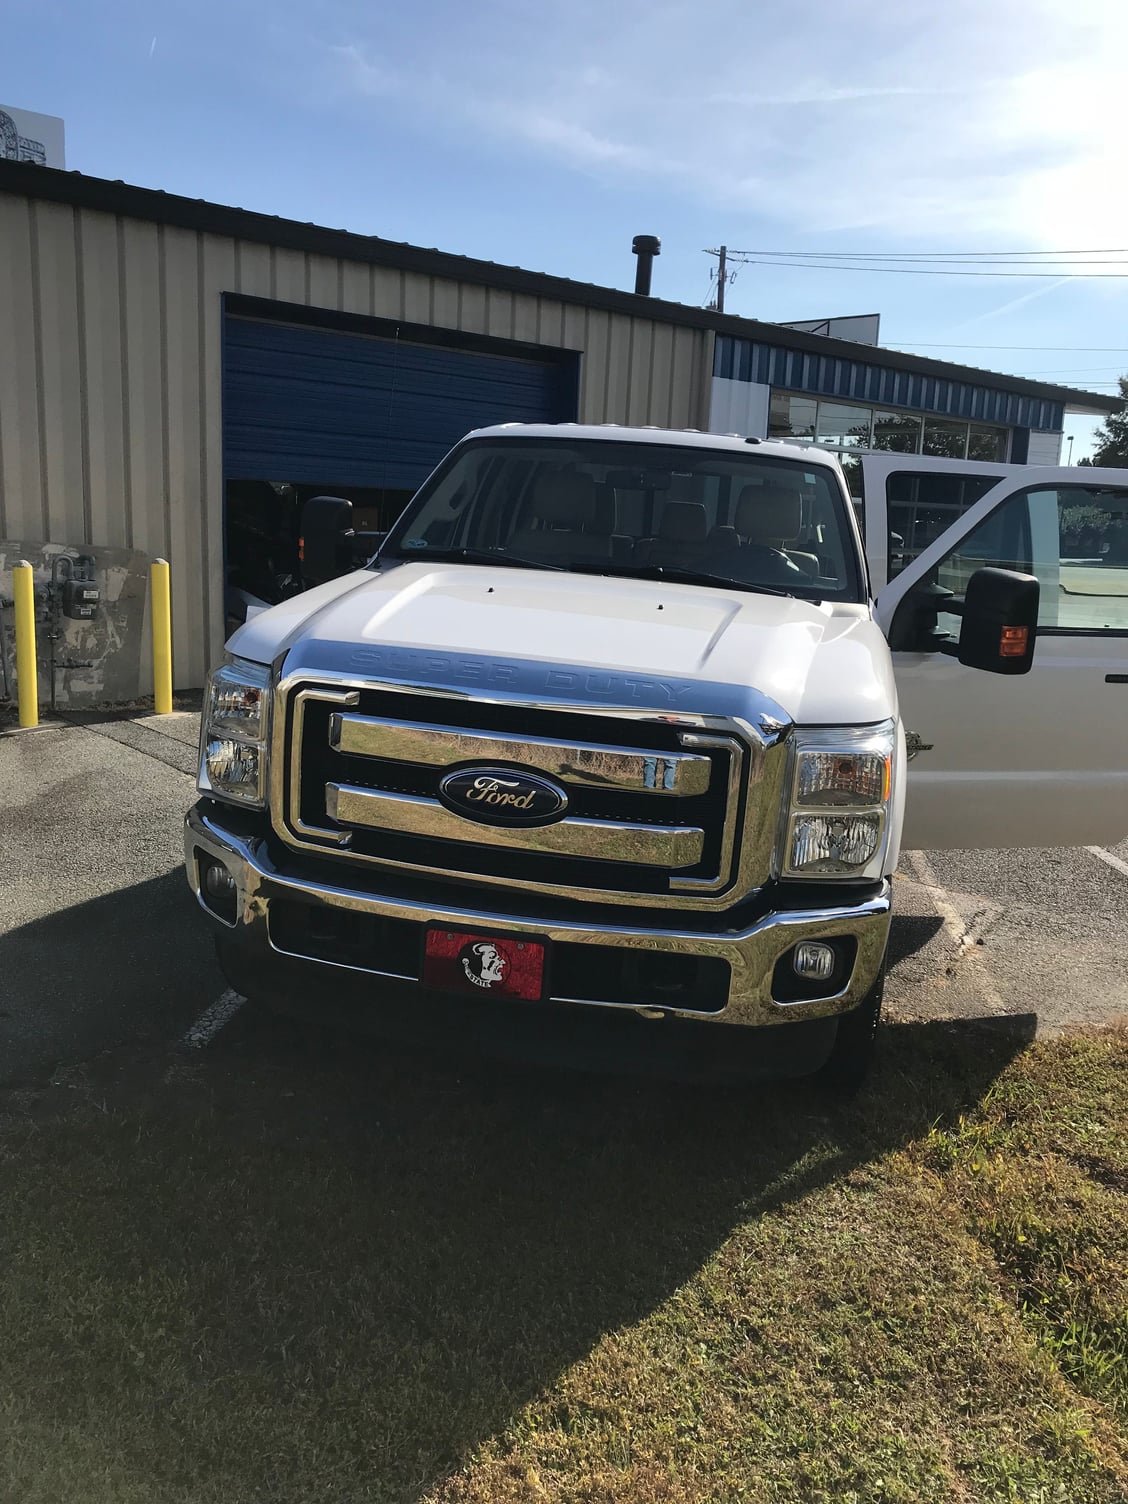 2012 F250 Lariat 6.7L FX4 - SOLD - The Hull Truth - Boating and Fishing